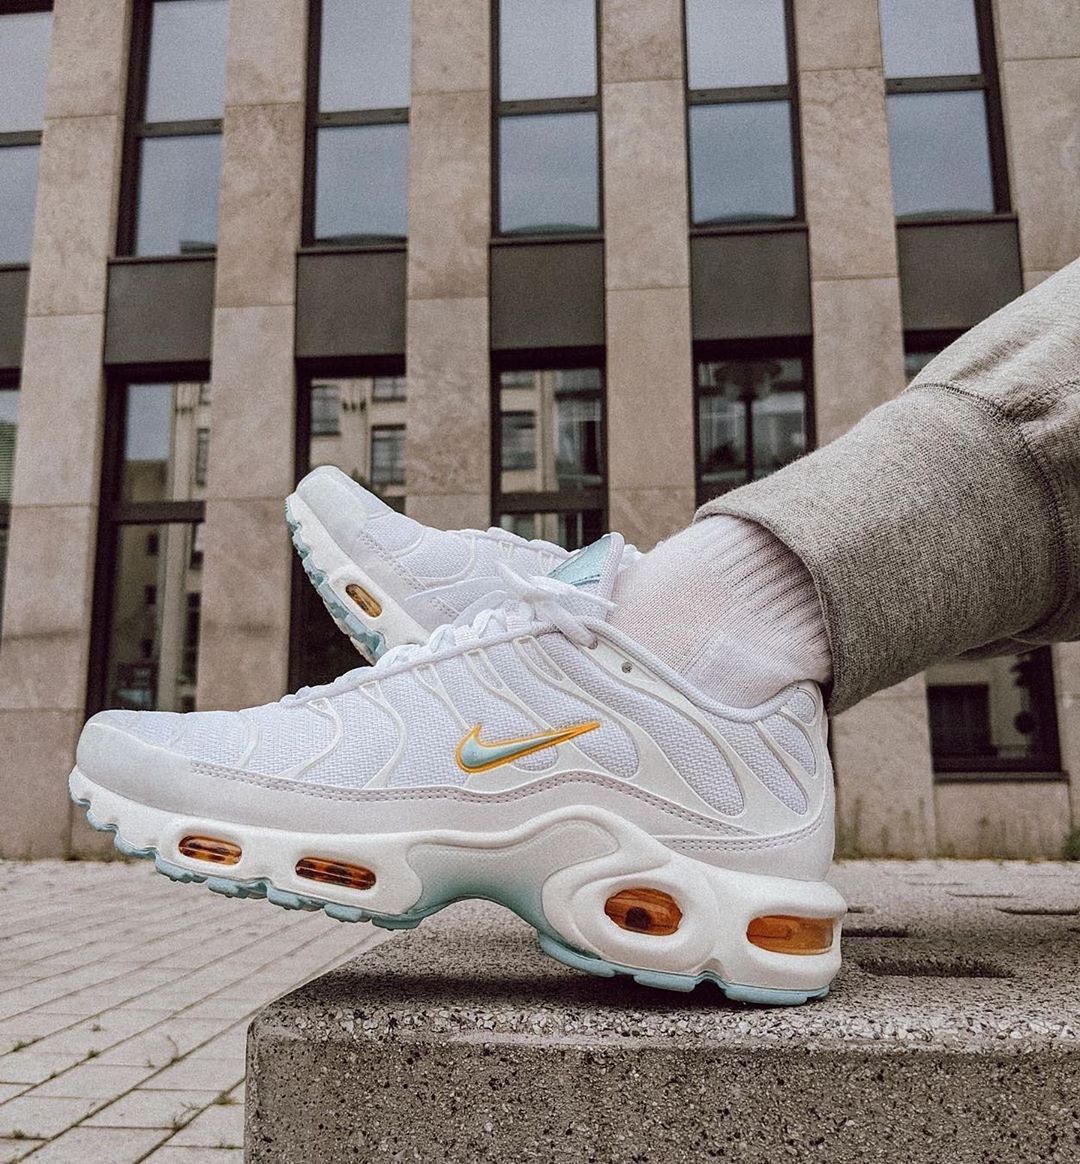 Imaginativo Lograr esta ahí The Sole Womens on Twitter: "SAVE OVER £50 on the Nike TN Air Max Plus  White Glacier Ice in Foot Locker's Singles Day sale! 💙 Link &gt;  https://t.co/GNz4M82WGL Retail - £140 Sale - £